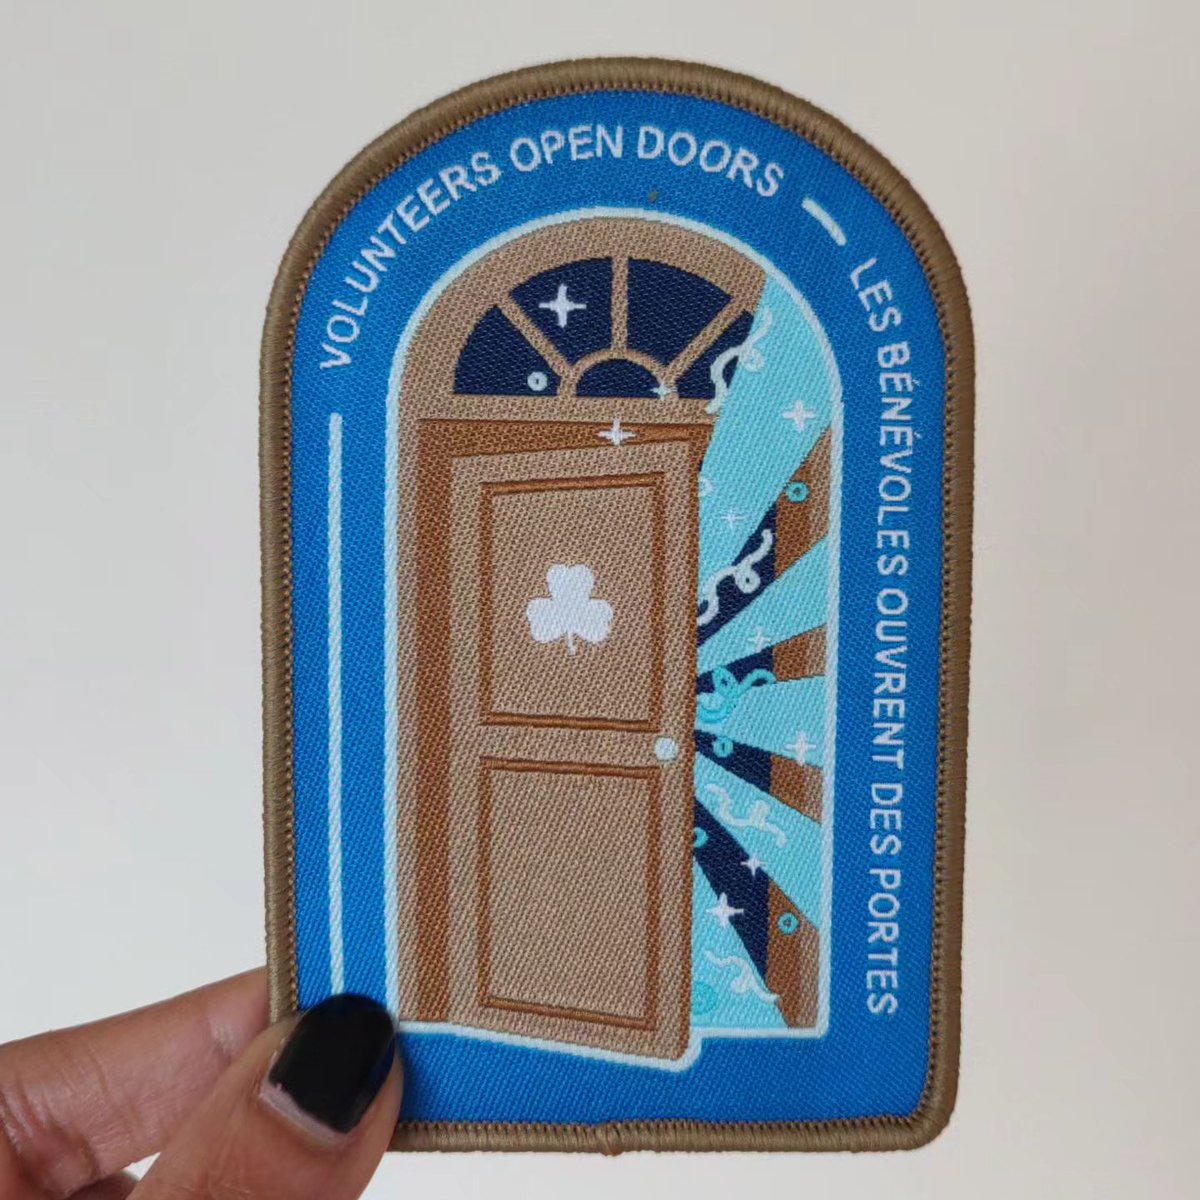 Thank you to all Girl Guide volunteers who give their time each week, lead fun activities, and open doors for girls to new experiences and a world of possibilities 💙 National Volunteer Week April 14-21 #girlguidesonnv #volunteerweek #shineyourguidinglight #girlguidesofcanada